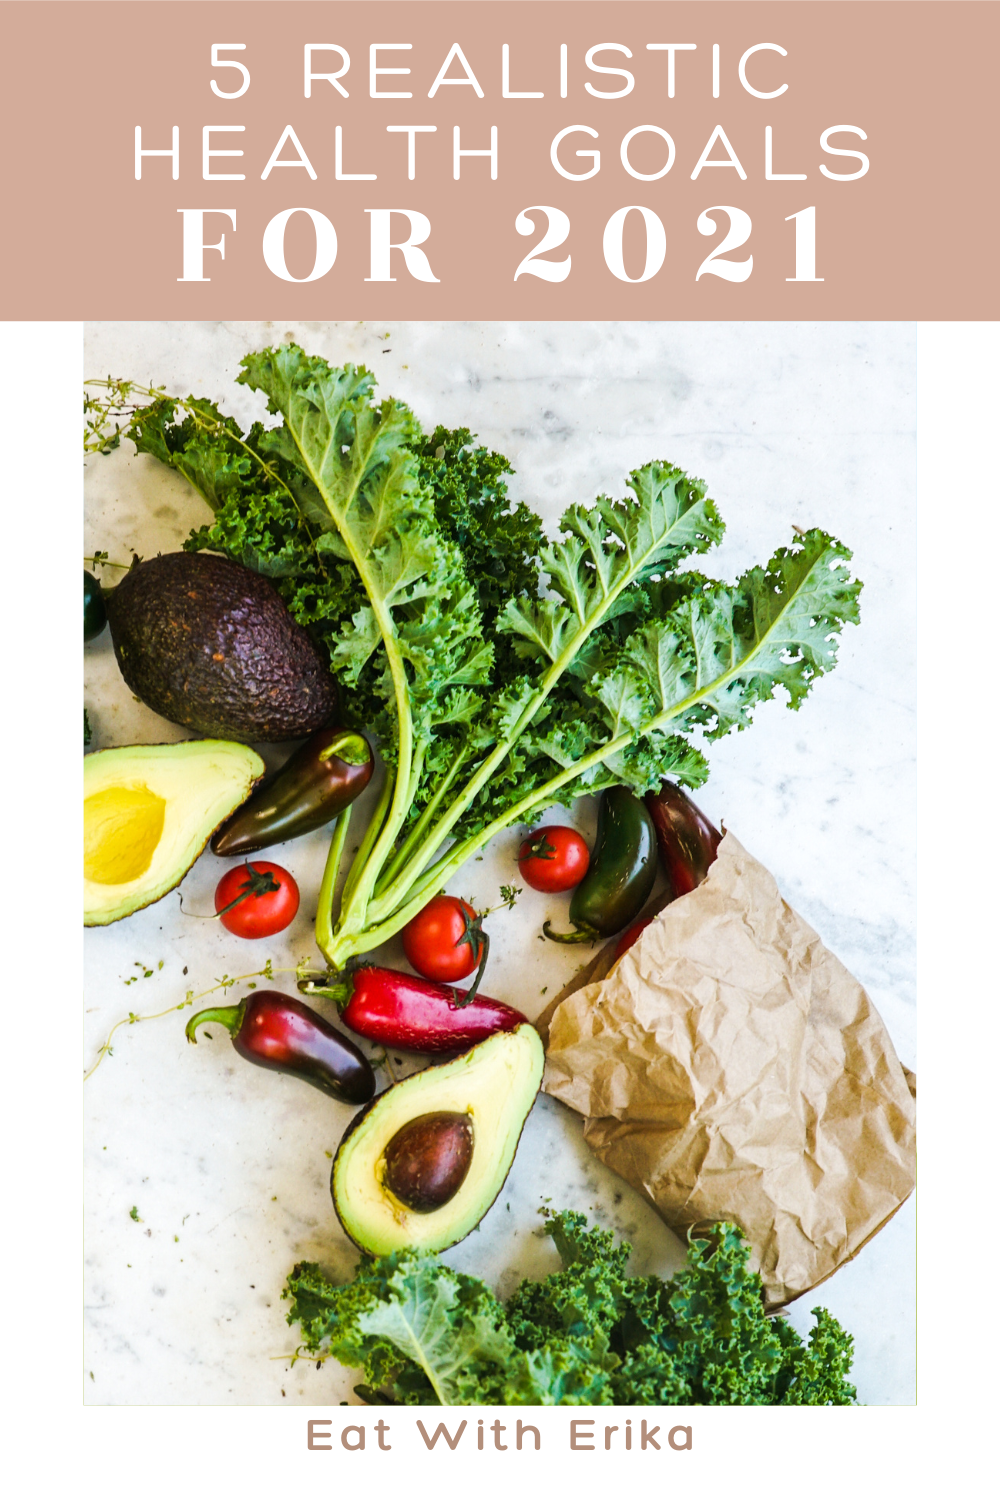 kale, avocado, tomato, peppers in paper bag on counter, 5 realistic health goals for 2021